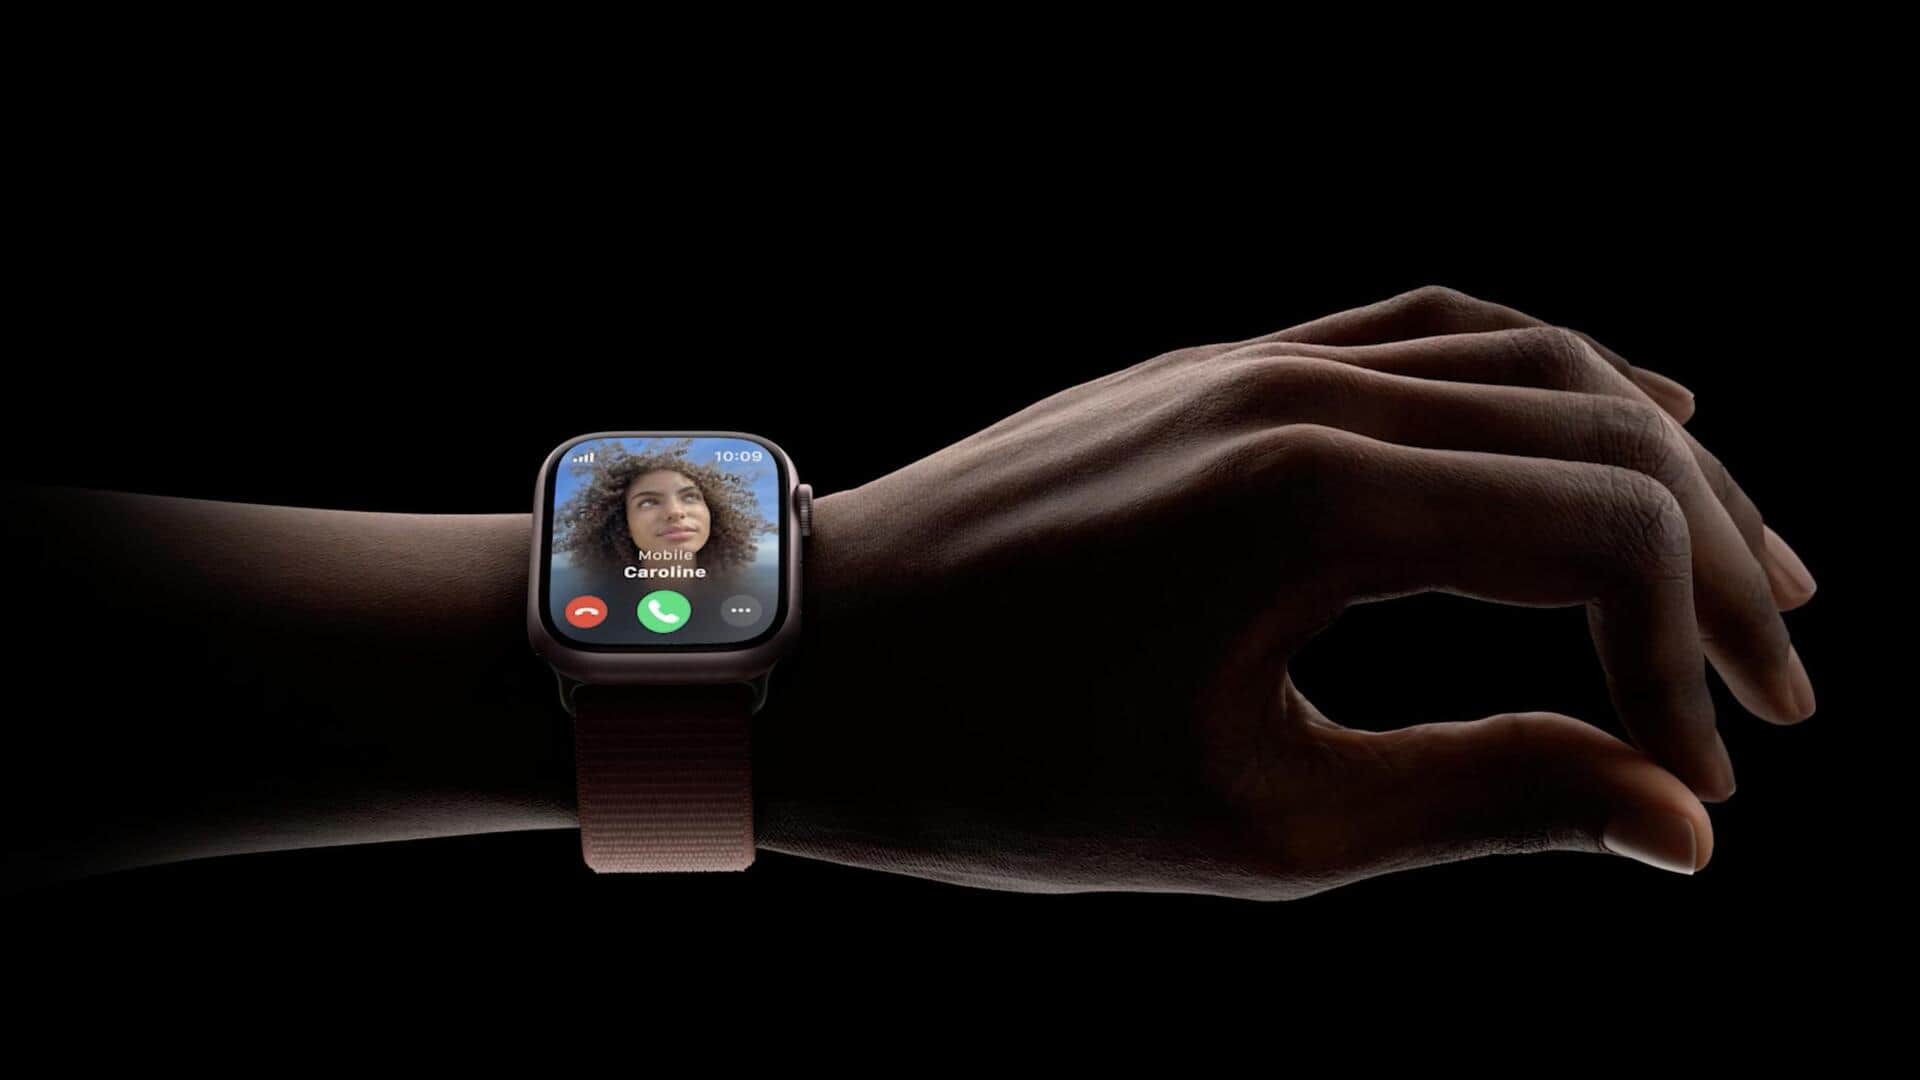 'Double Tap' gesture on Apple Watch: How it works